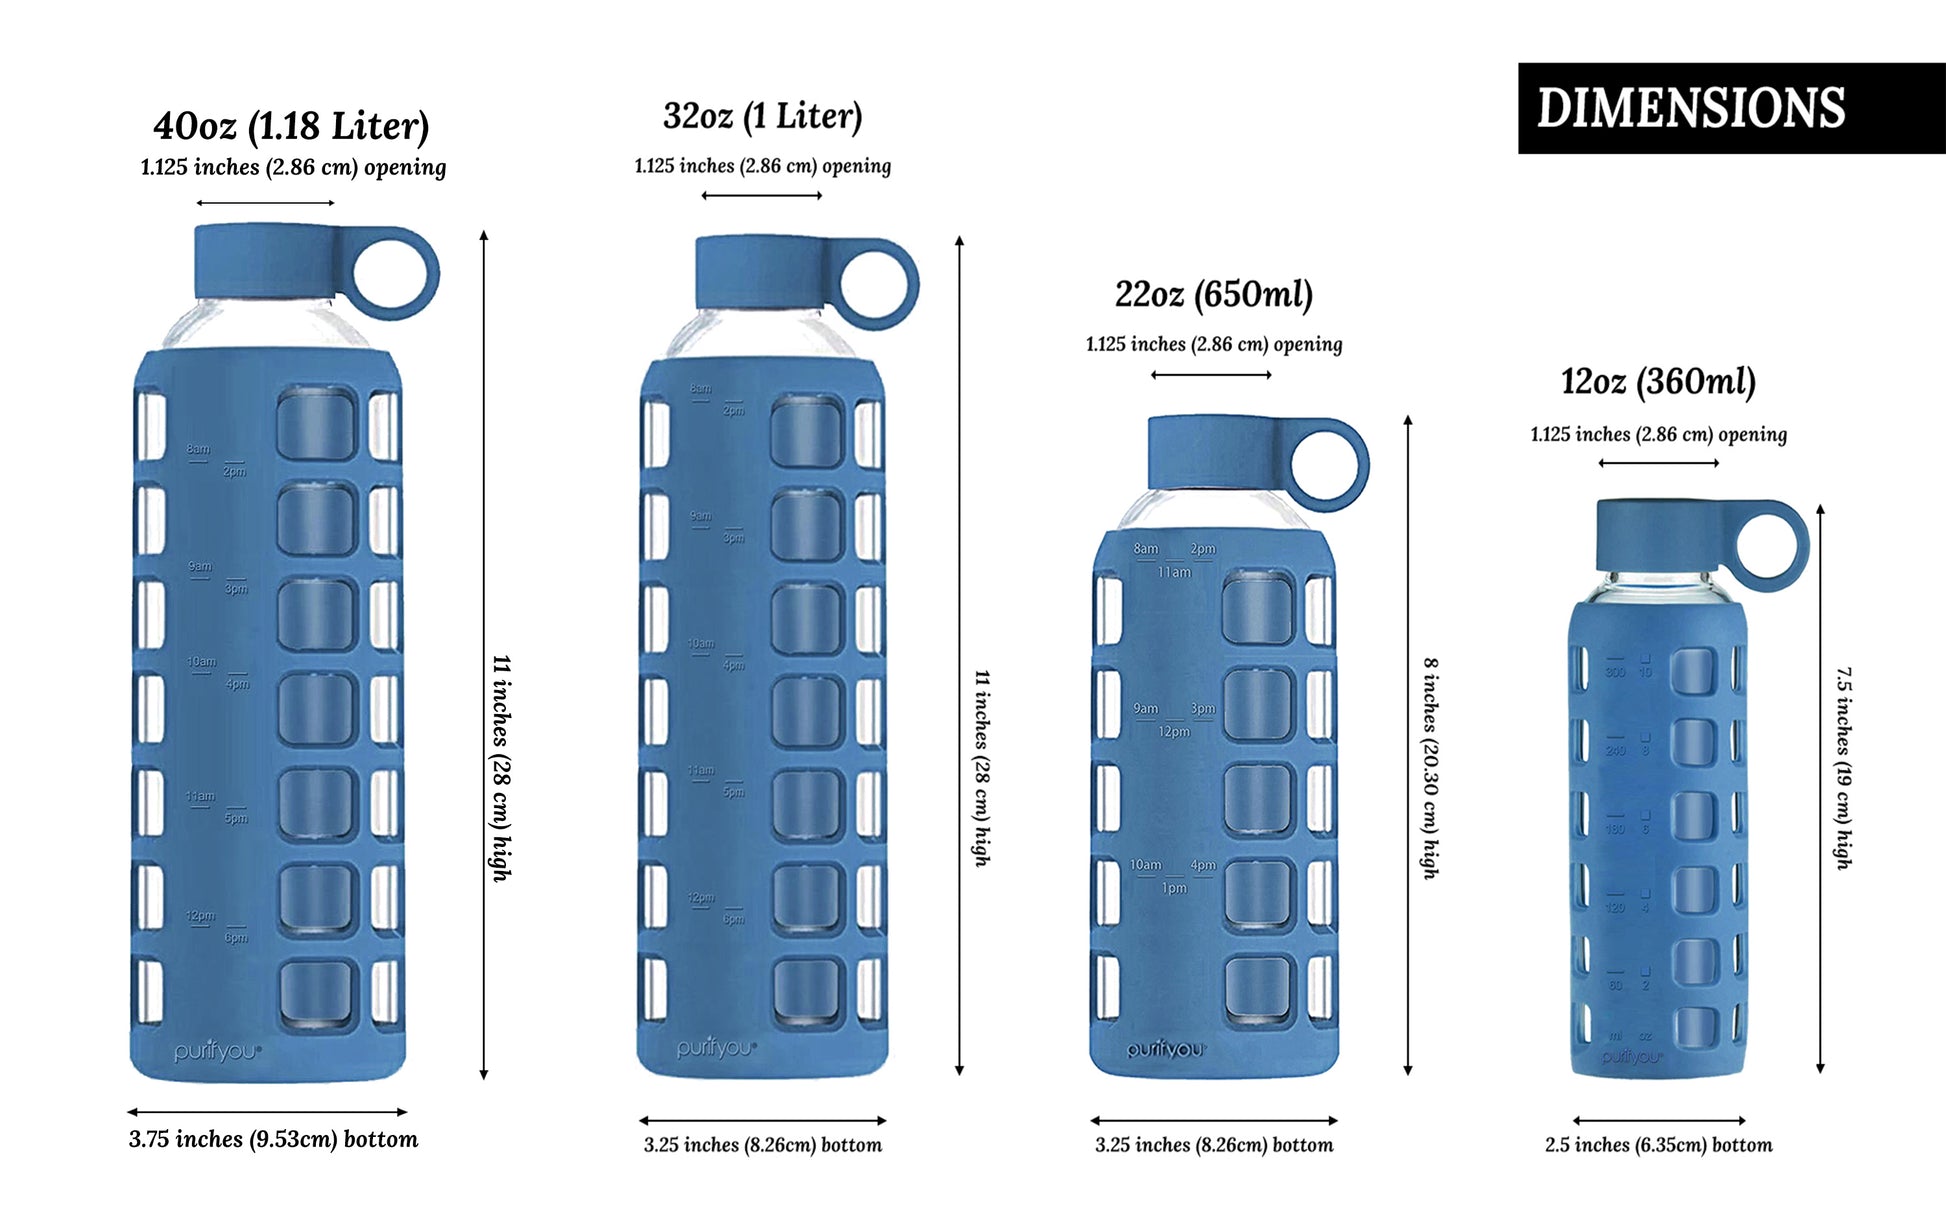 purifyou Premium 12 oz Reusable Glass Water Bottles with Time and Volume  Markings, Non-Slip Silicone Sleeve & Stainless Steel Lid Insert, for Water,  Milk, Juice 